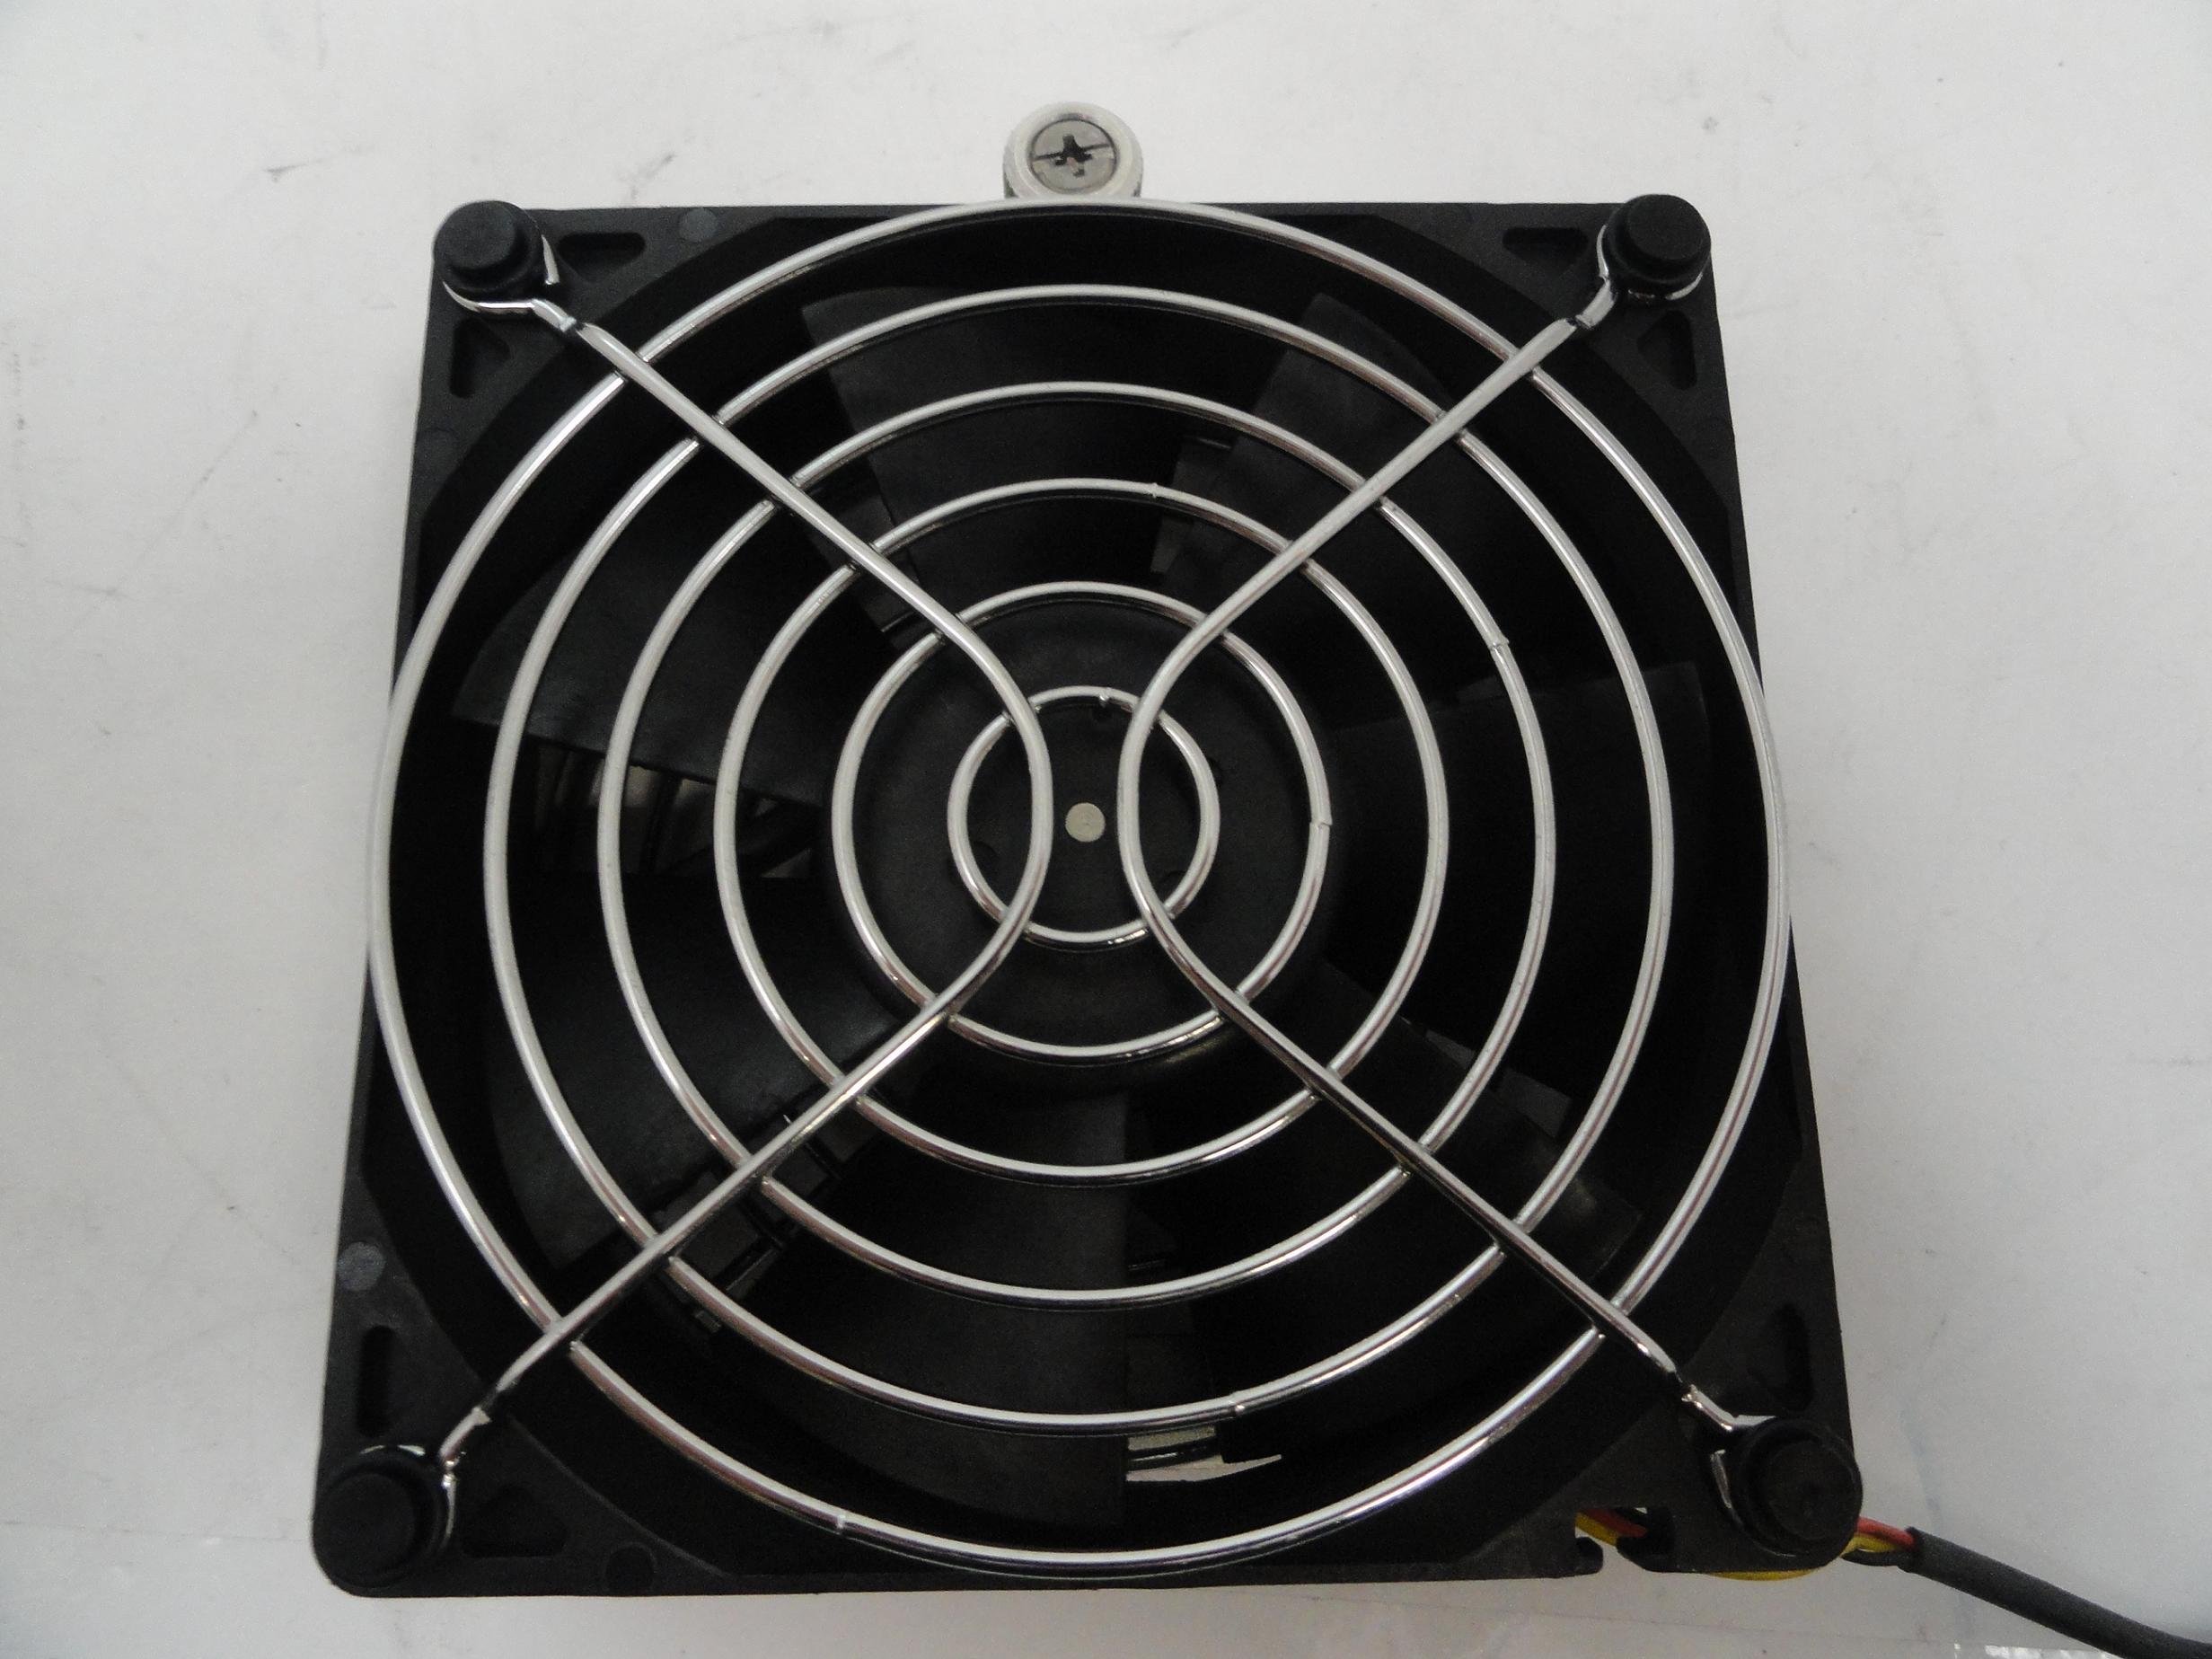 PR16701_TA350DC_Nidec HP 93mm Fan Assembly with Mounting Plate - Image2